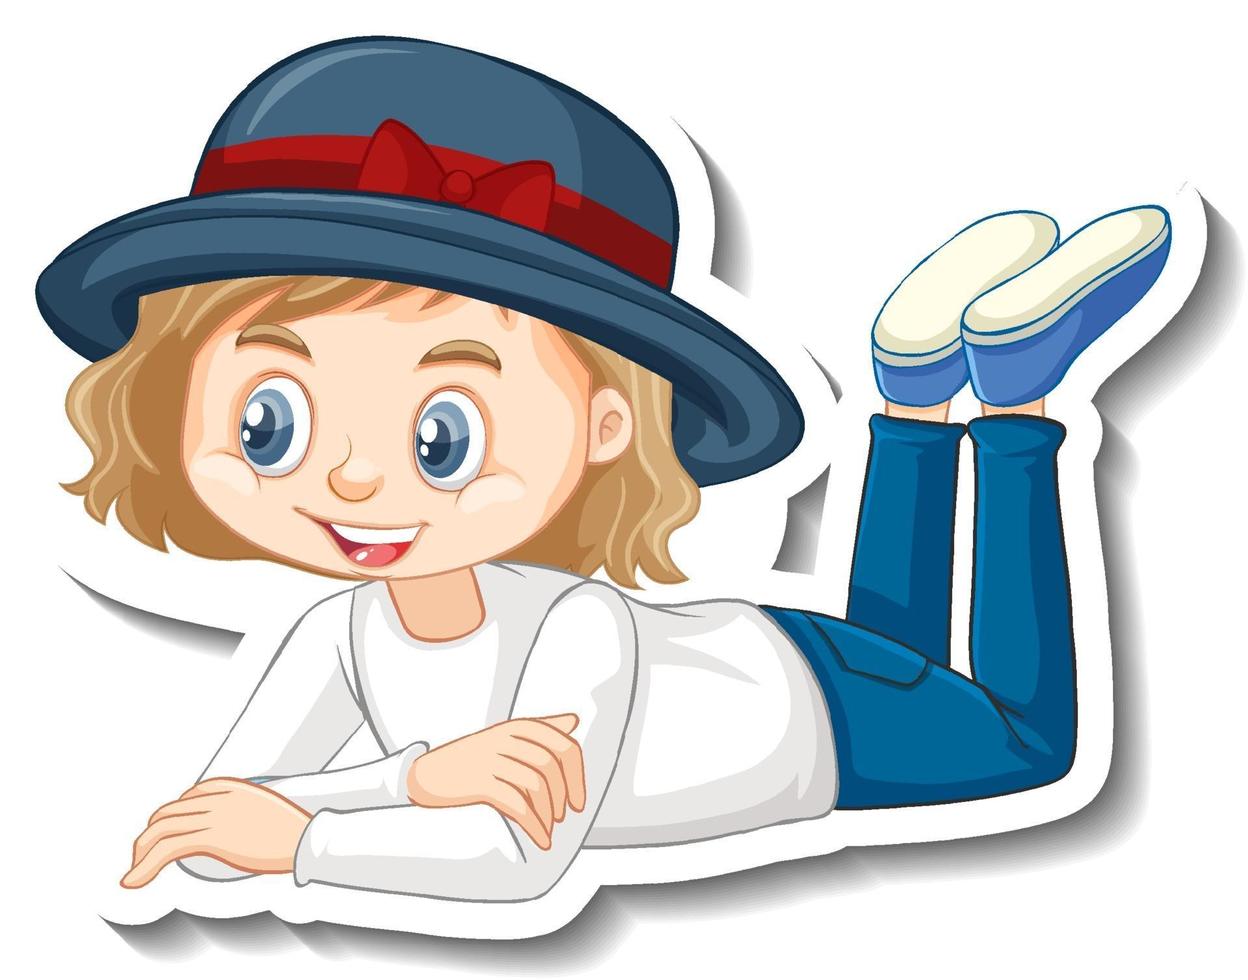 A girl laying pose cartoon character sticker vector